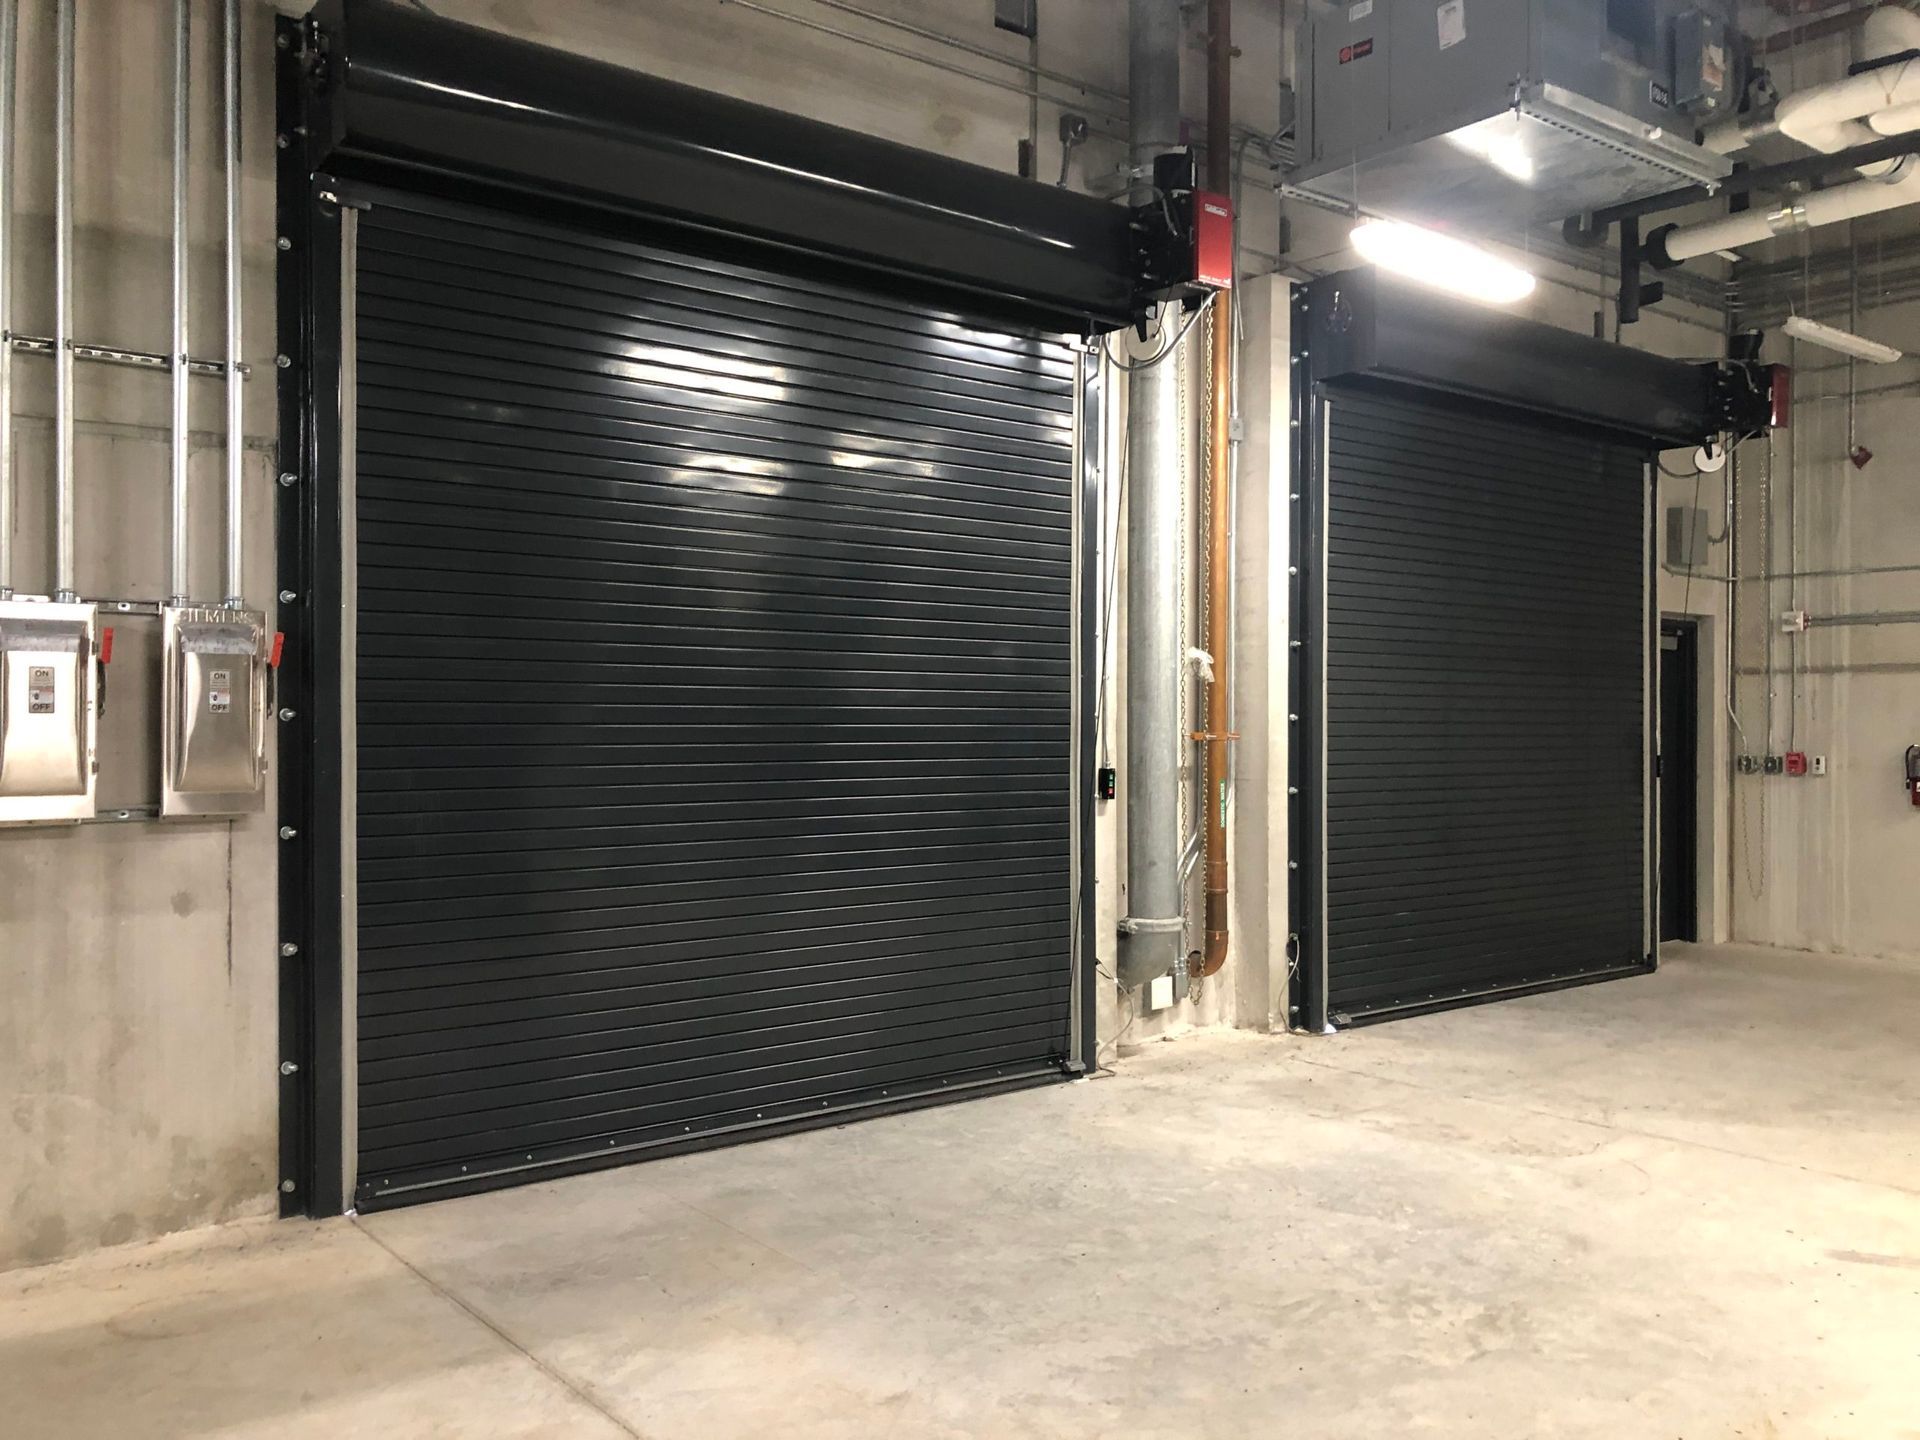 two black roller shutters are sitting next to each other in a building .